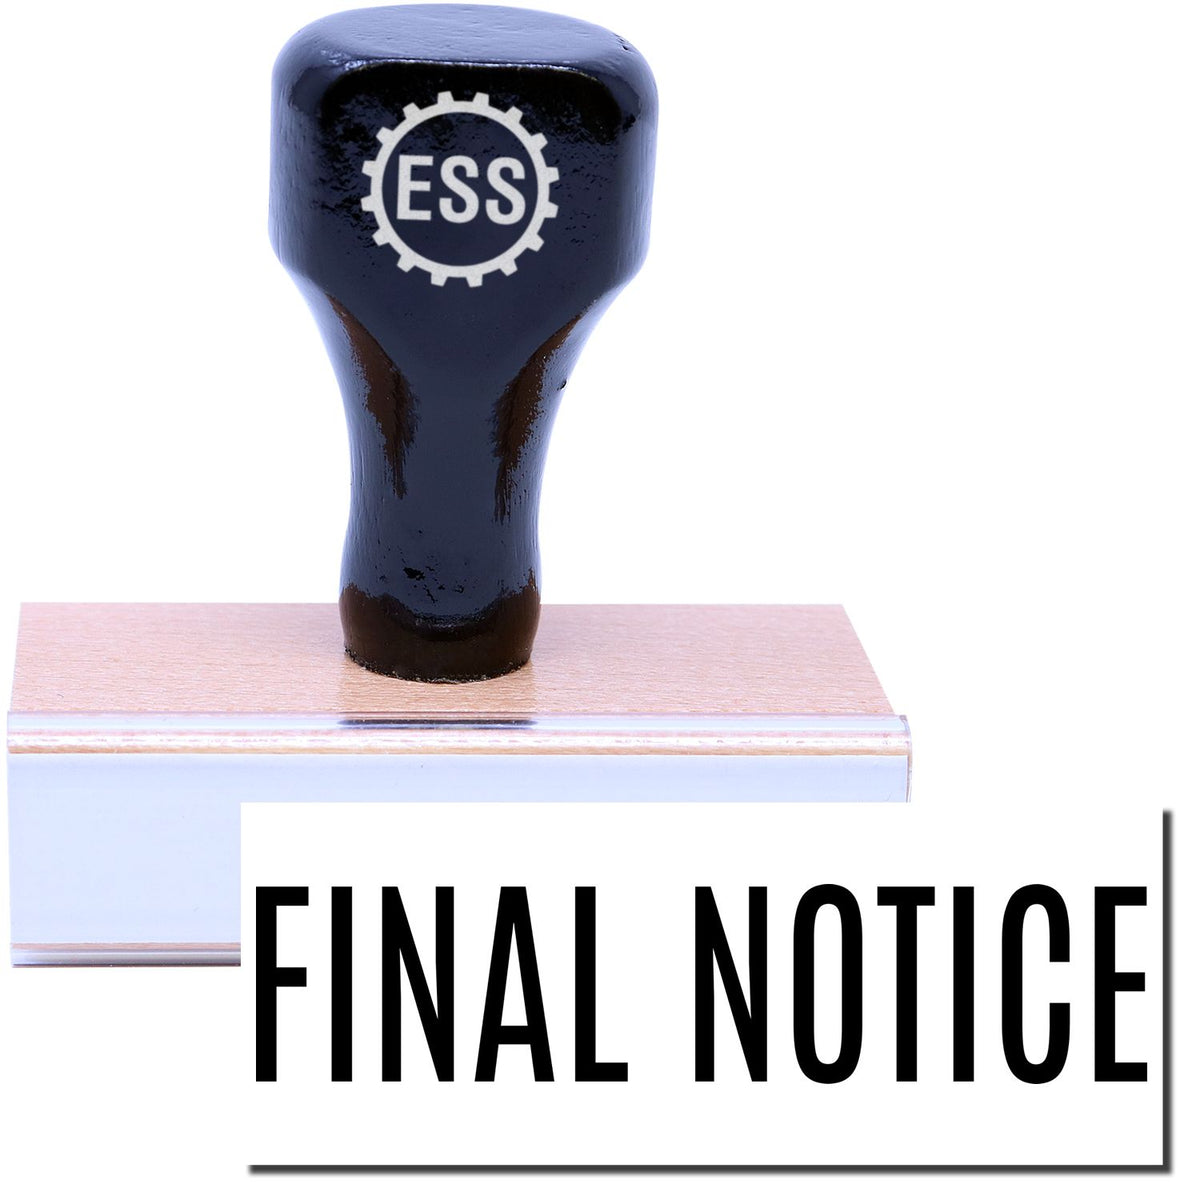 A stock office rubber stamp with a stamped image showing how the text &quot;FINAL NOTICE&quot; In a narrow font is displayed after stamping.